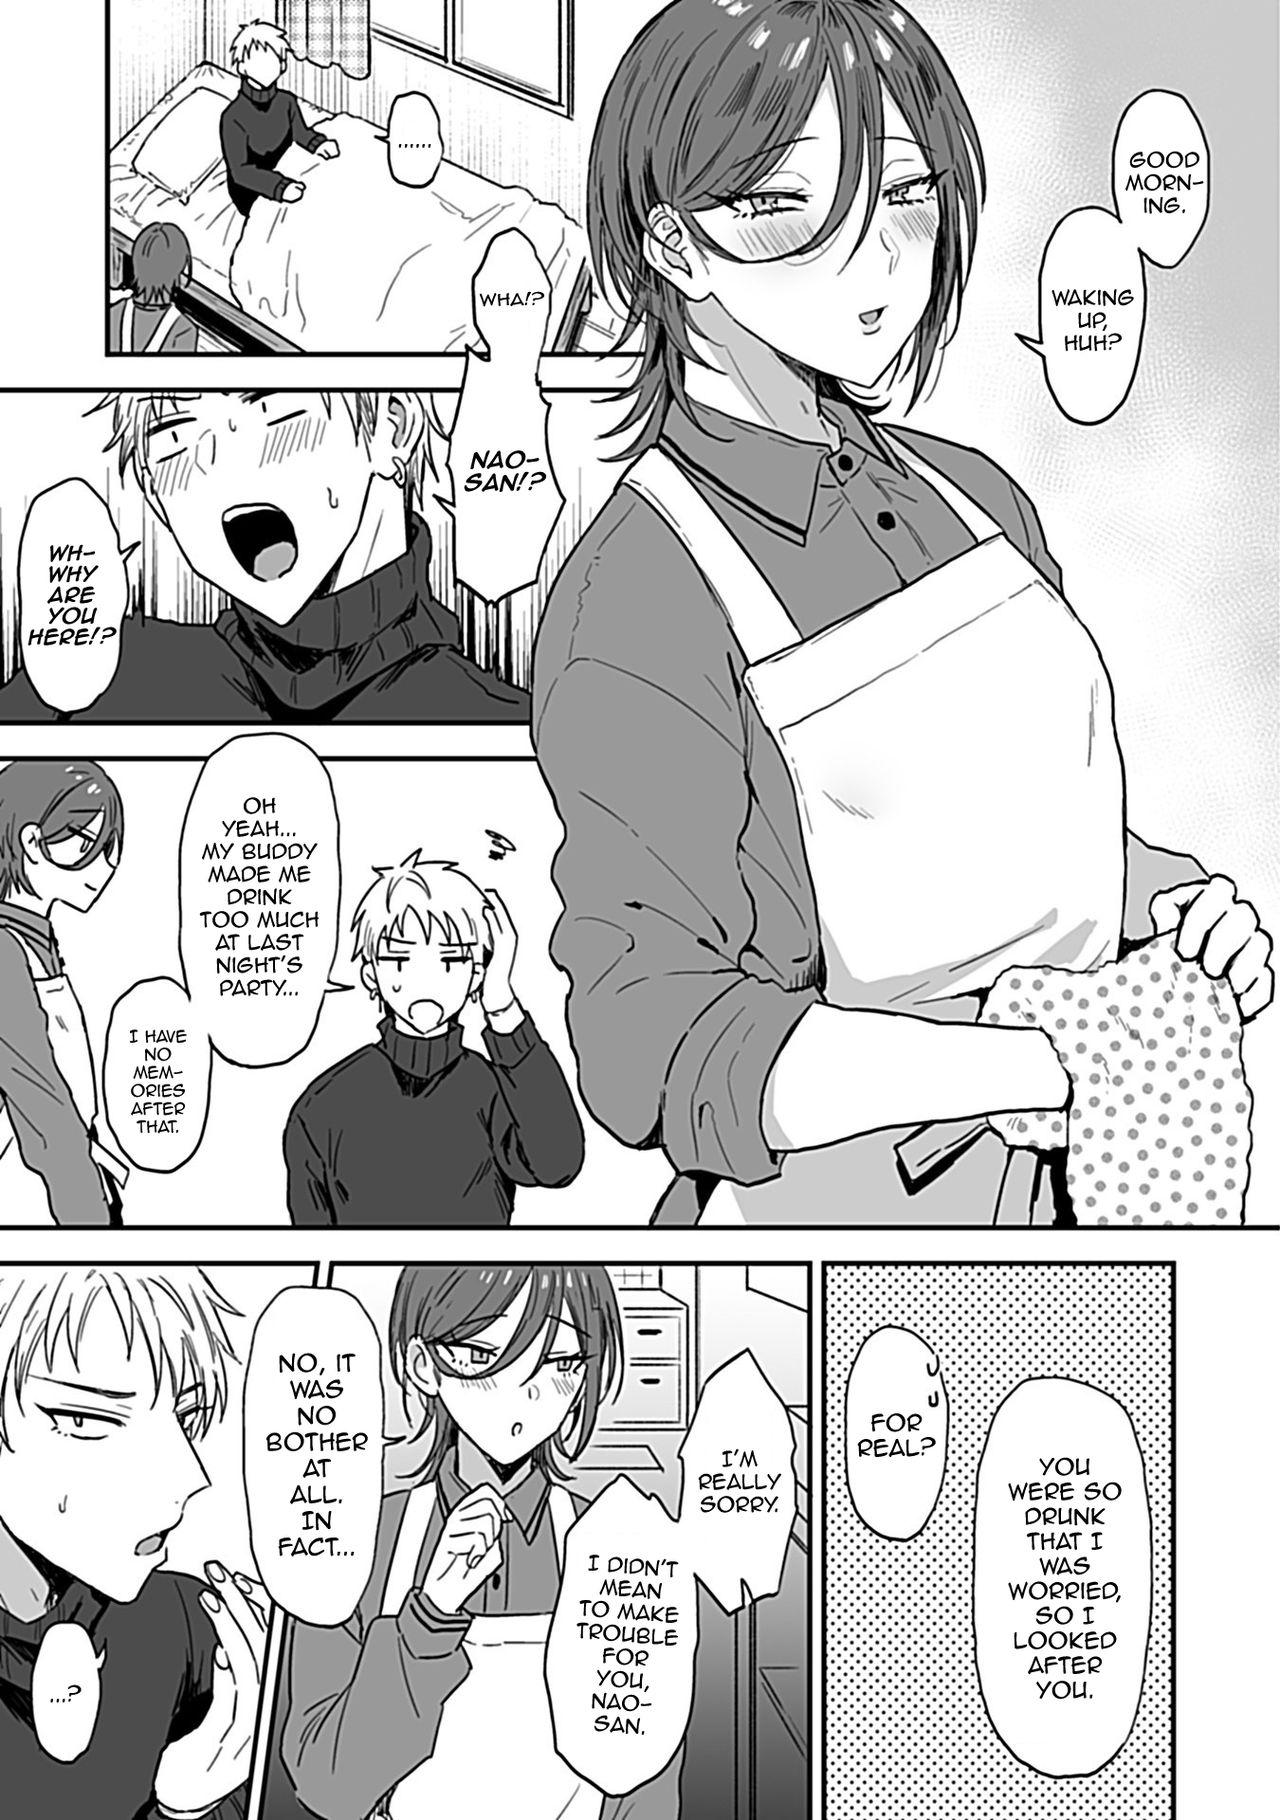 Top [Ainaryumu] Tonari no Ecchi na Onii-san. 1 - The sexy boy who lives in the next! [R18] [English] [mysterymeat3] Real Amateurs - Page 7